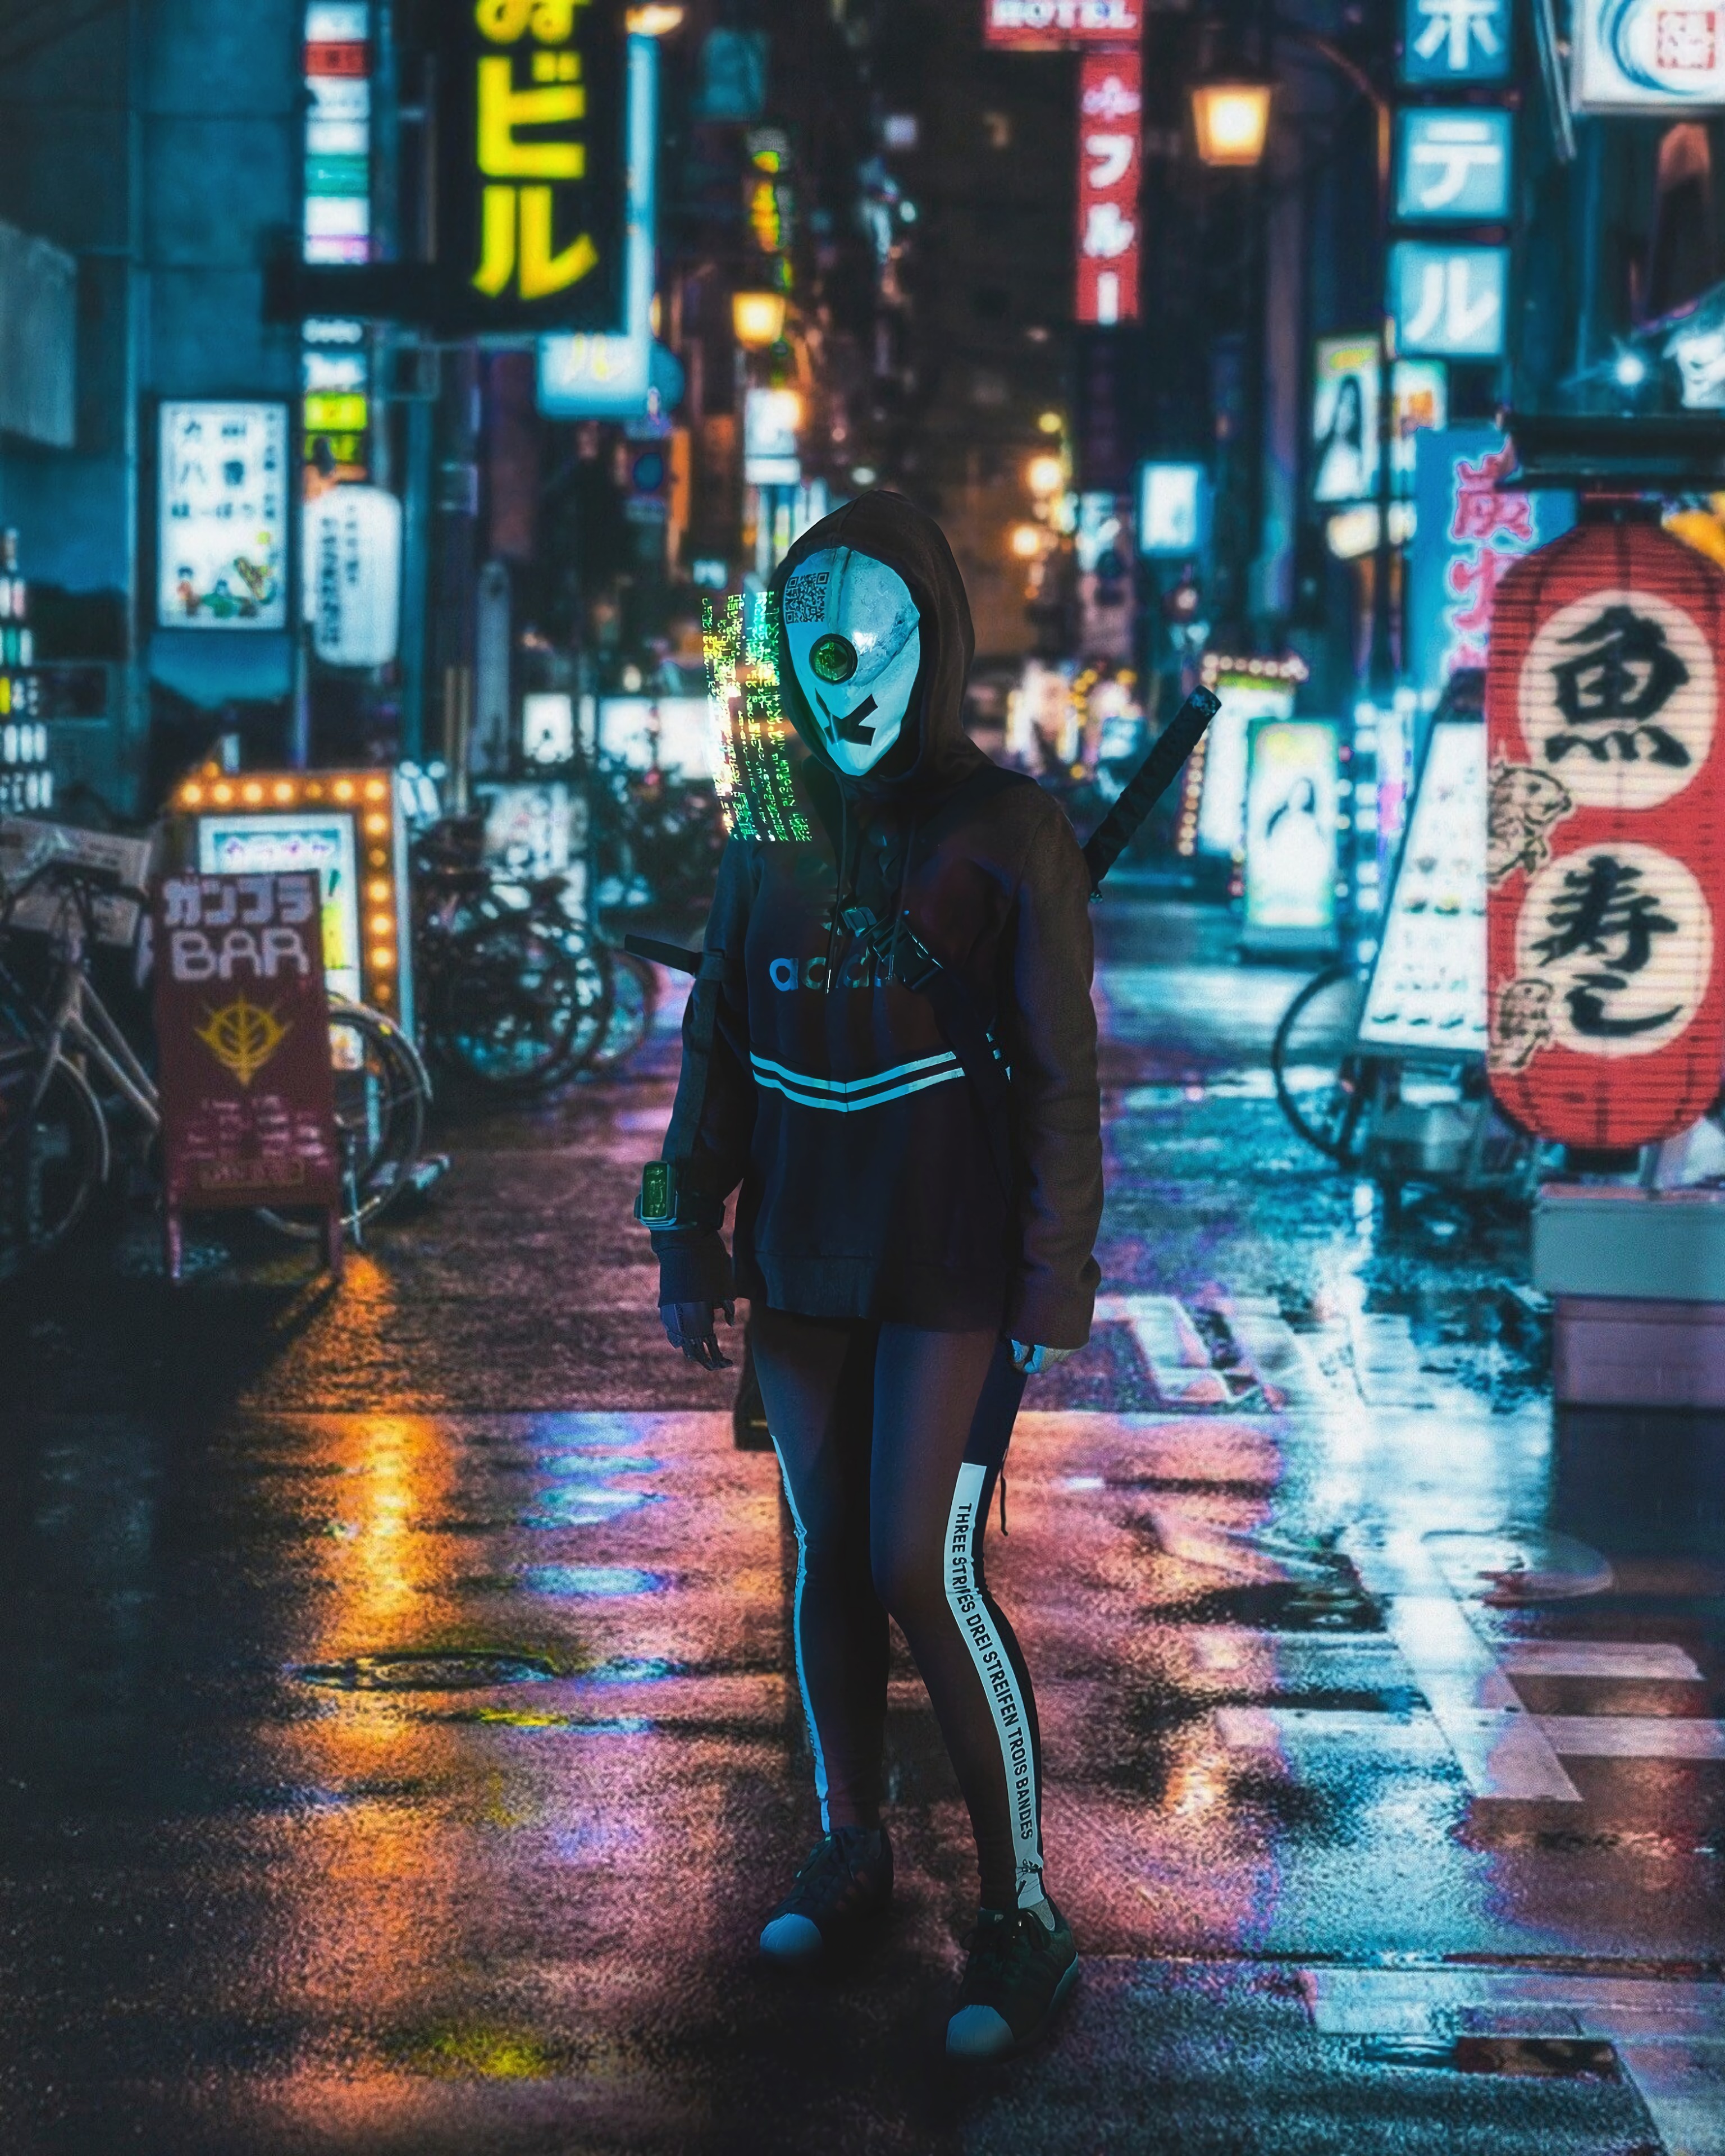 121250 Screensavers and Wallpapers Cyborg for phone. Download miscellanea, miscellaneous, cyberpunk, sci-fi, street, cyborg, hologram pictures for free